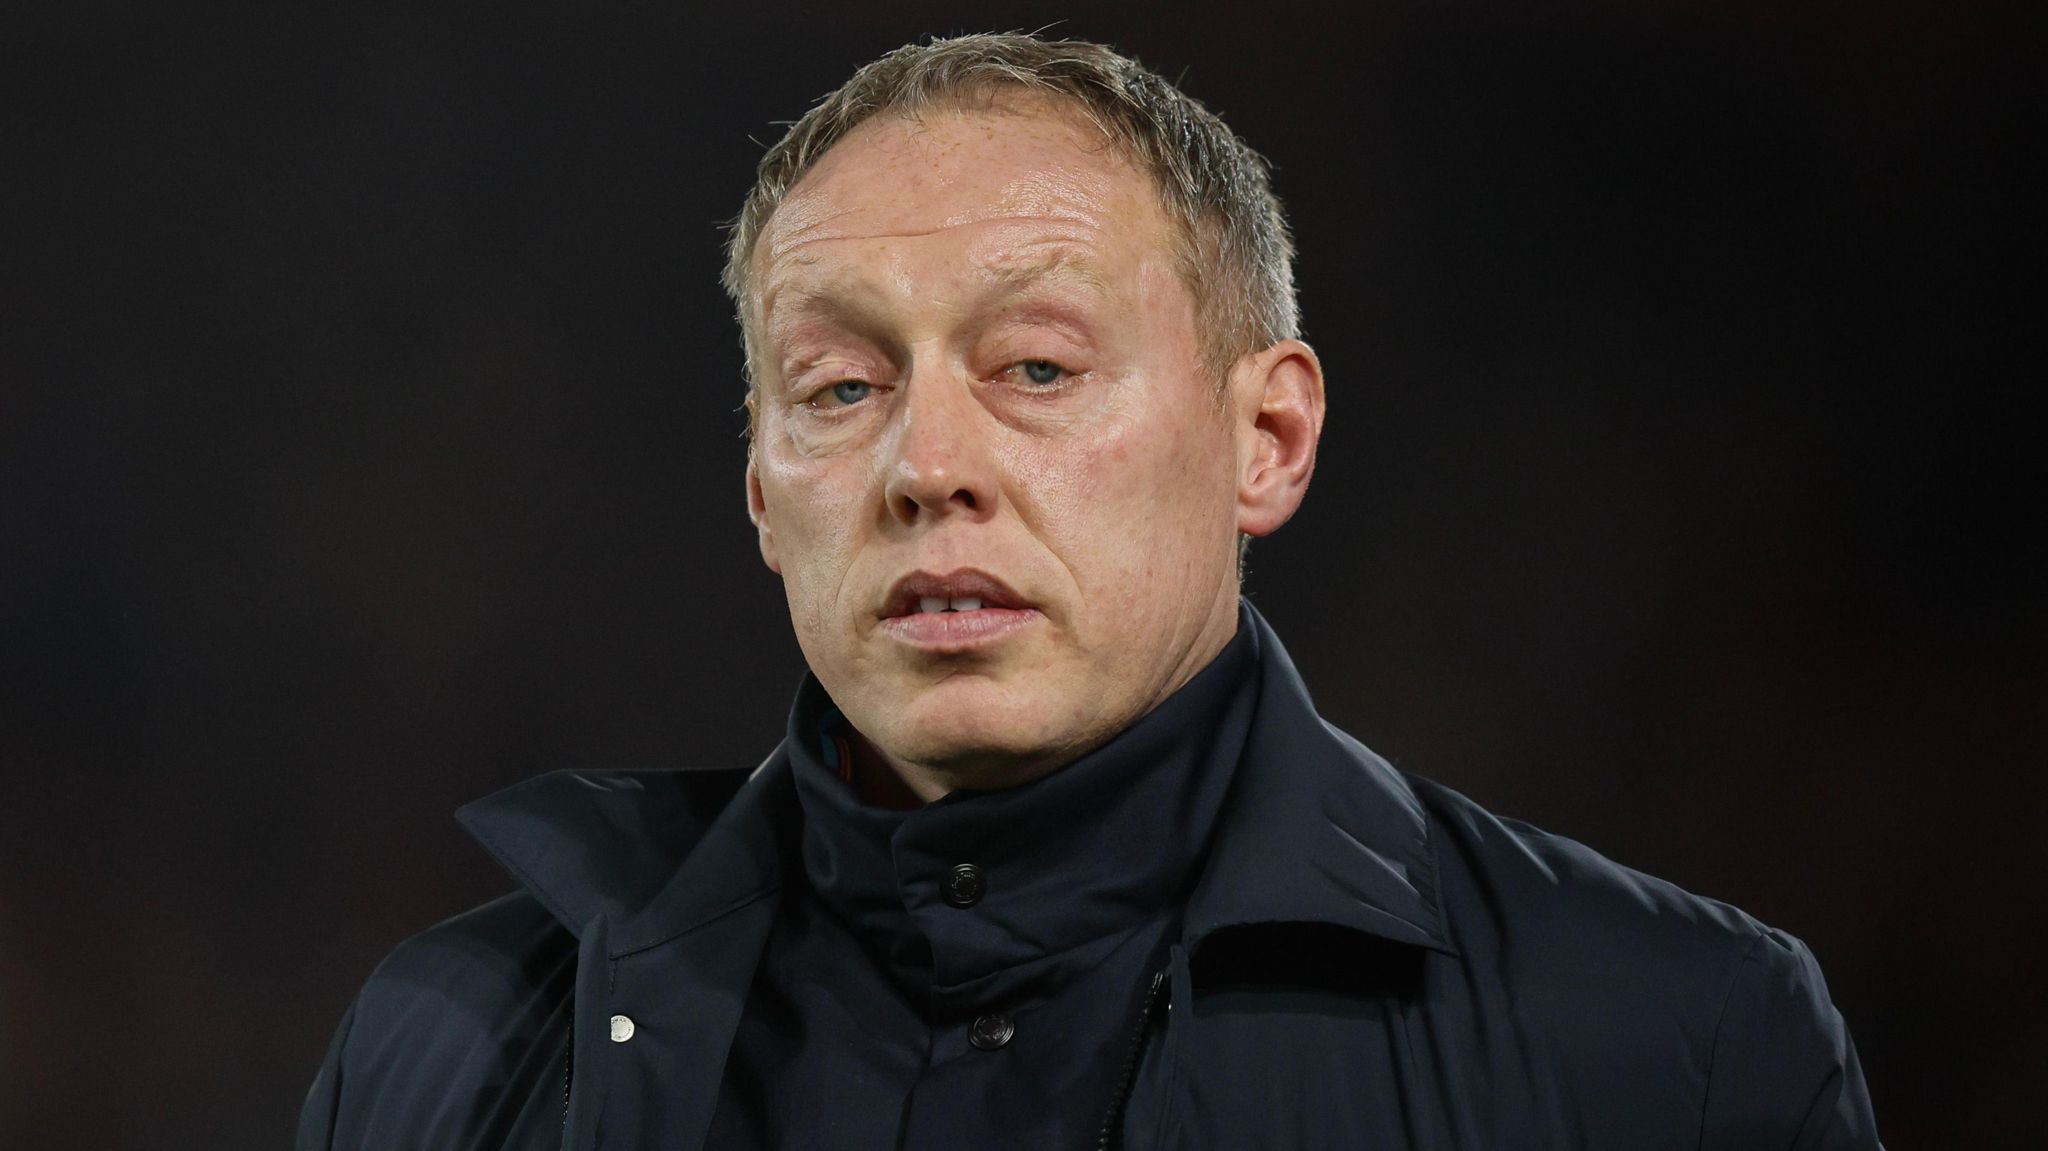 Leicester City: Steve Cooper appointed new manager on 3-year deal